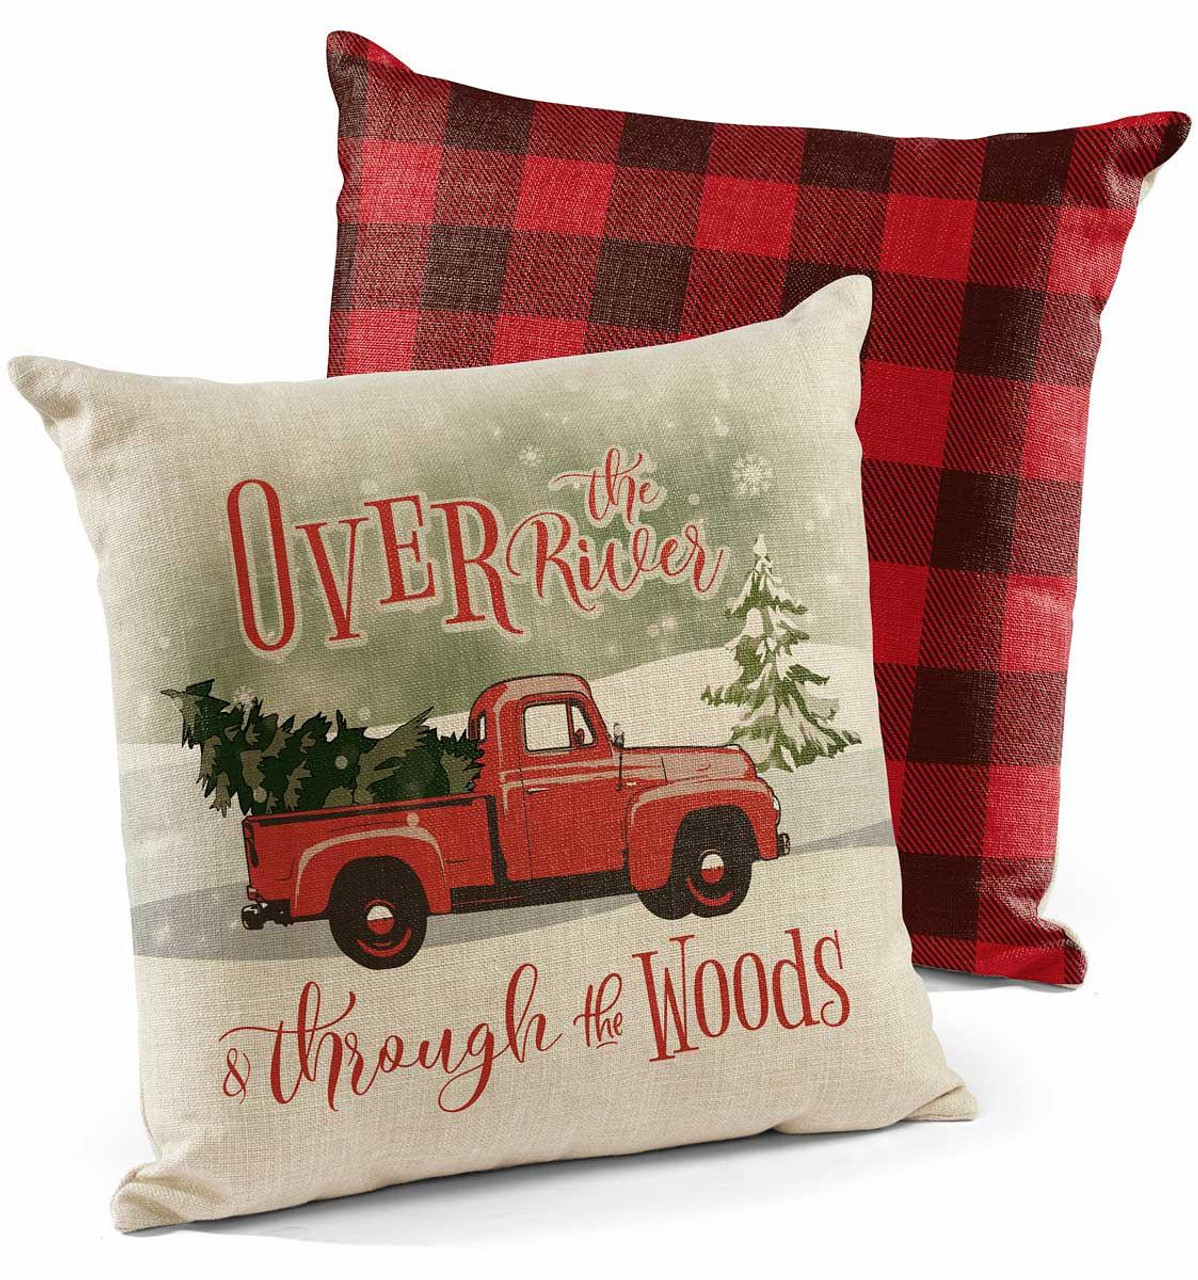 https://cdn11.bigcommerce.com/s-oo0gdojvjo/images/stencil/1280x1280/products/37654/48876/18-over-the-river-red-truck-decorative-square-throw-pillows-set-of-4-accent-pillow-wild-wings__83847.1542541094.jpg?c=2